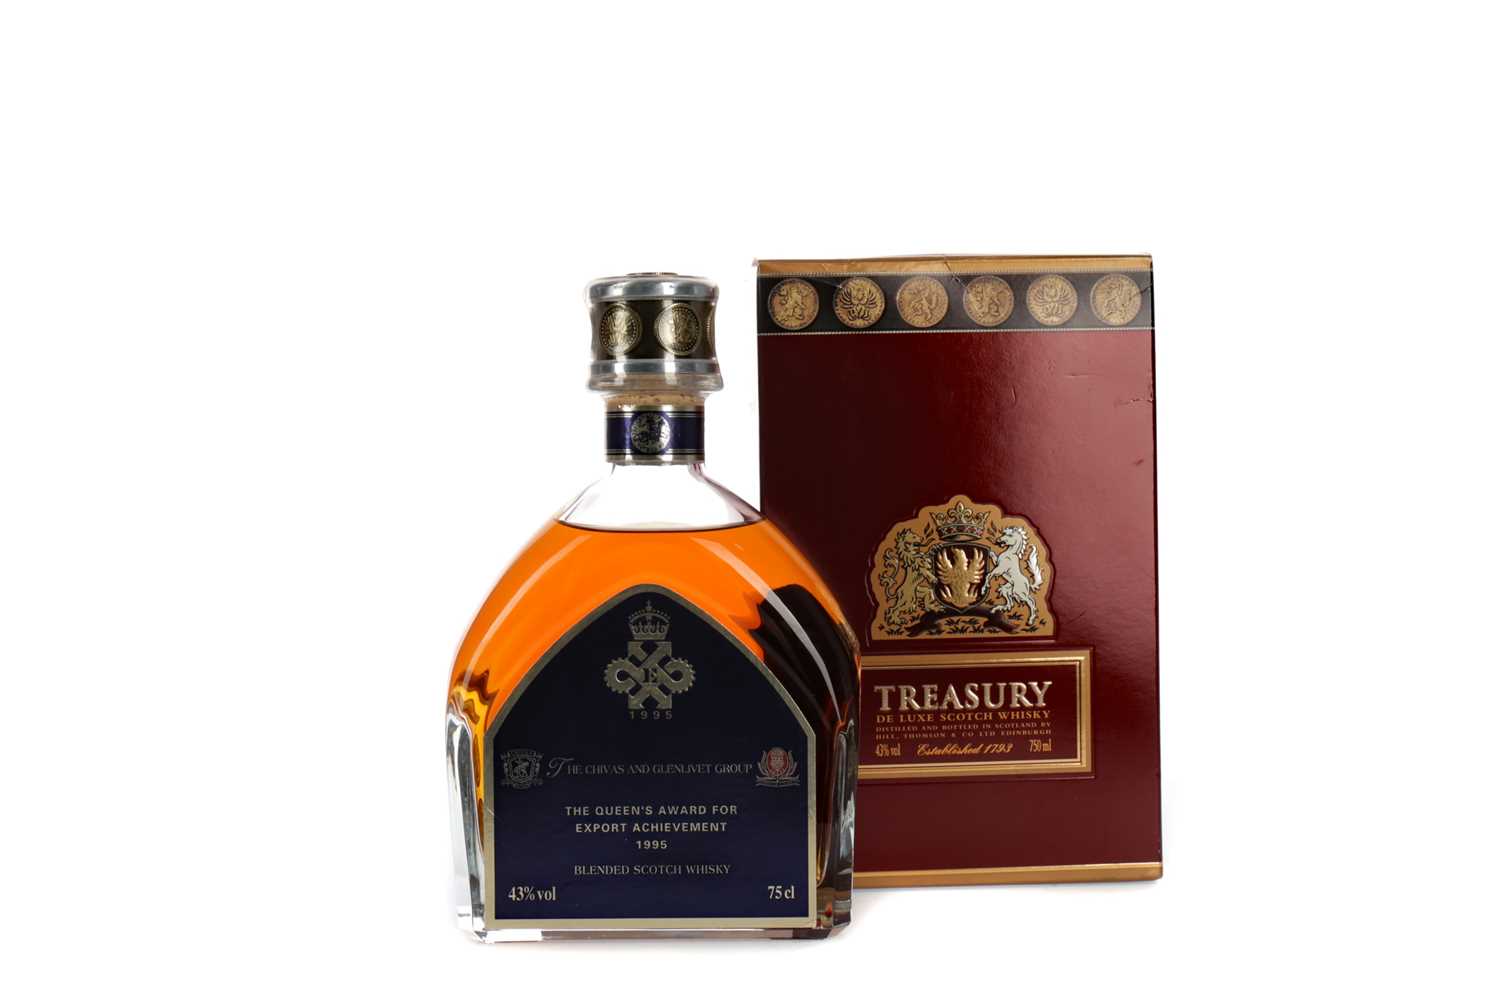 Lot 60 - CHIVAS AND GLELIVET GROUP QUEEN'S AWARD FOR EXPORT ACHIEVEMENT 1995